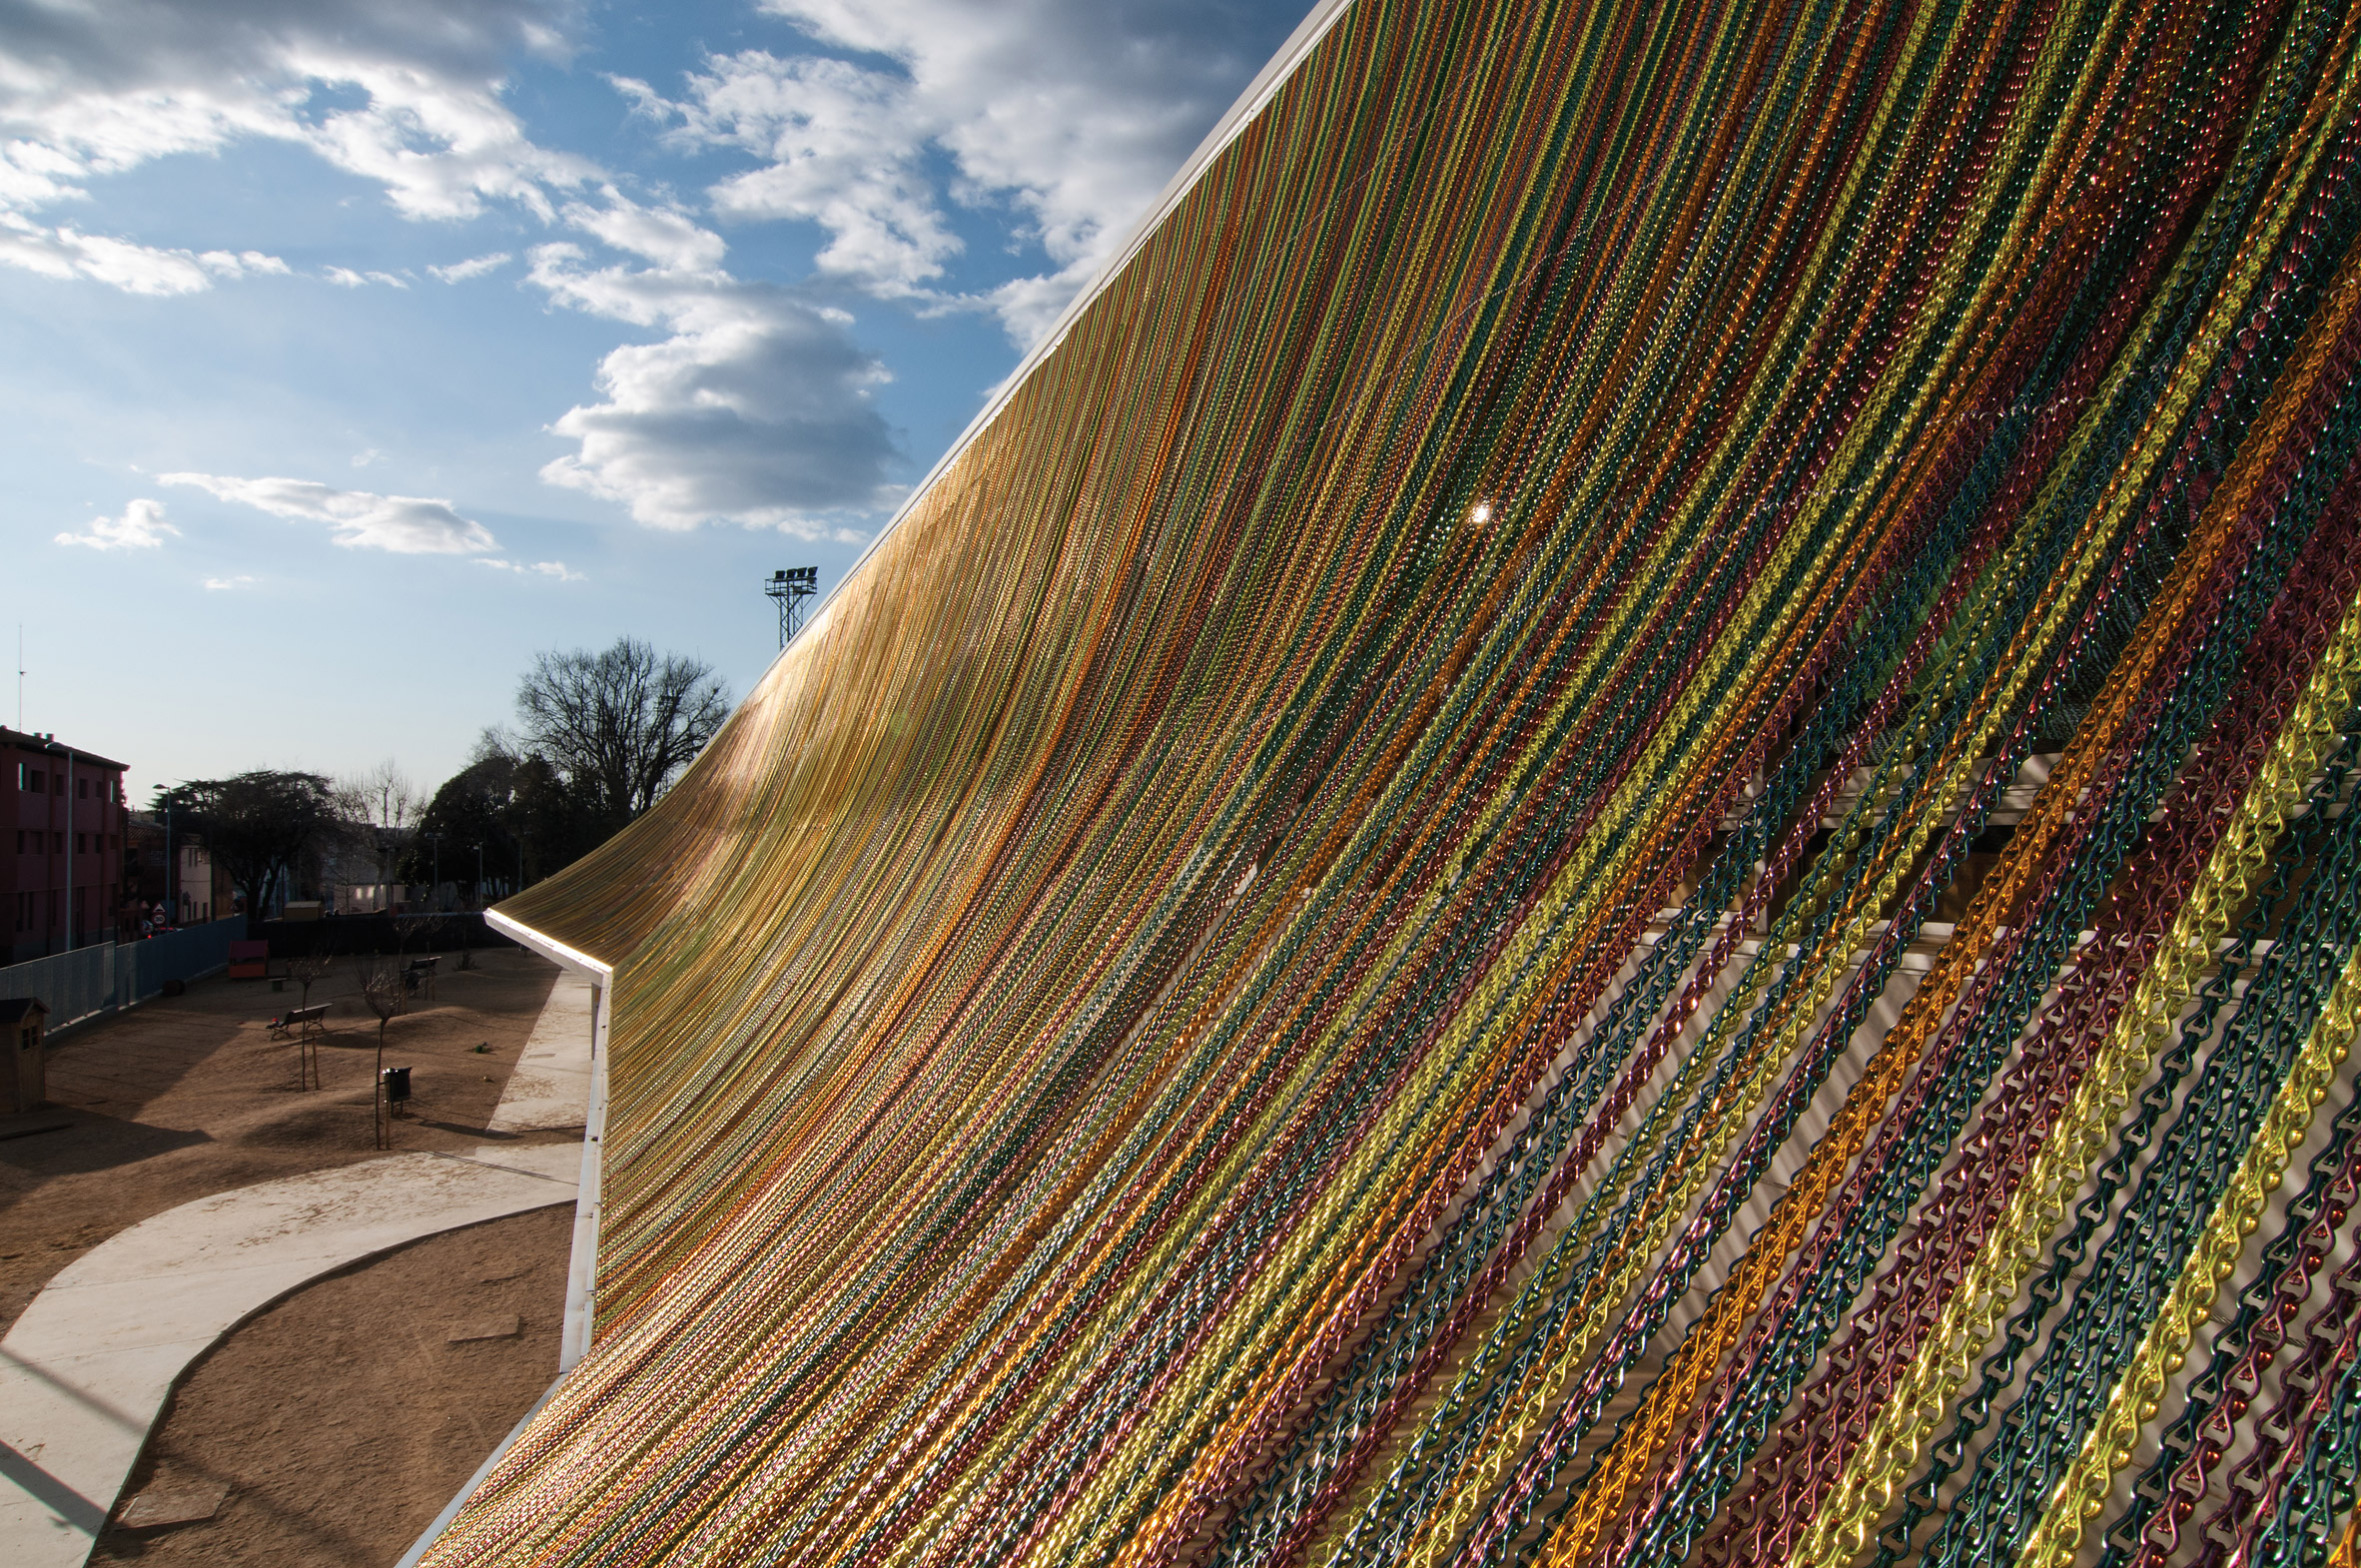 Close-up of the rainbow-coloured aluminium chain canopy on the Can Manent School in Cardedeu, Spain